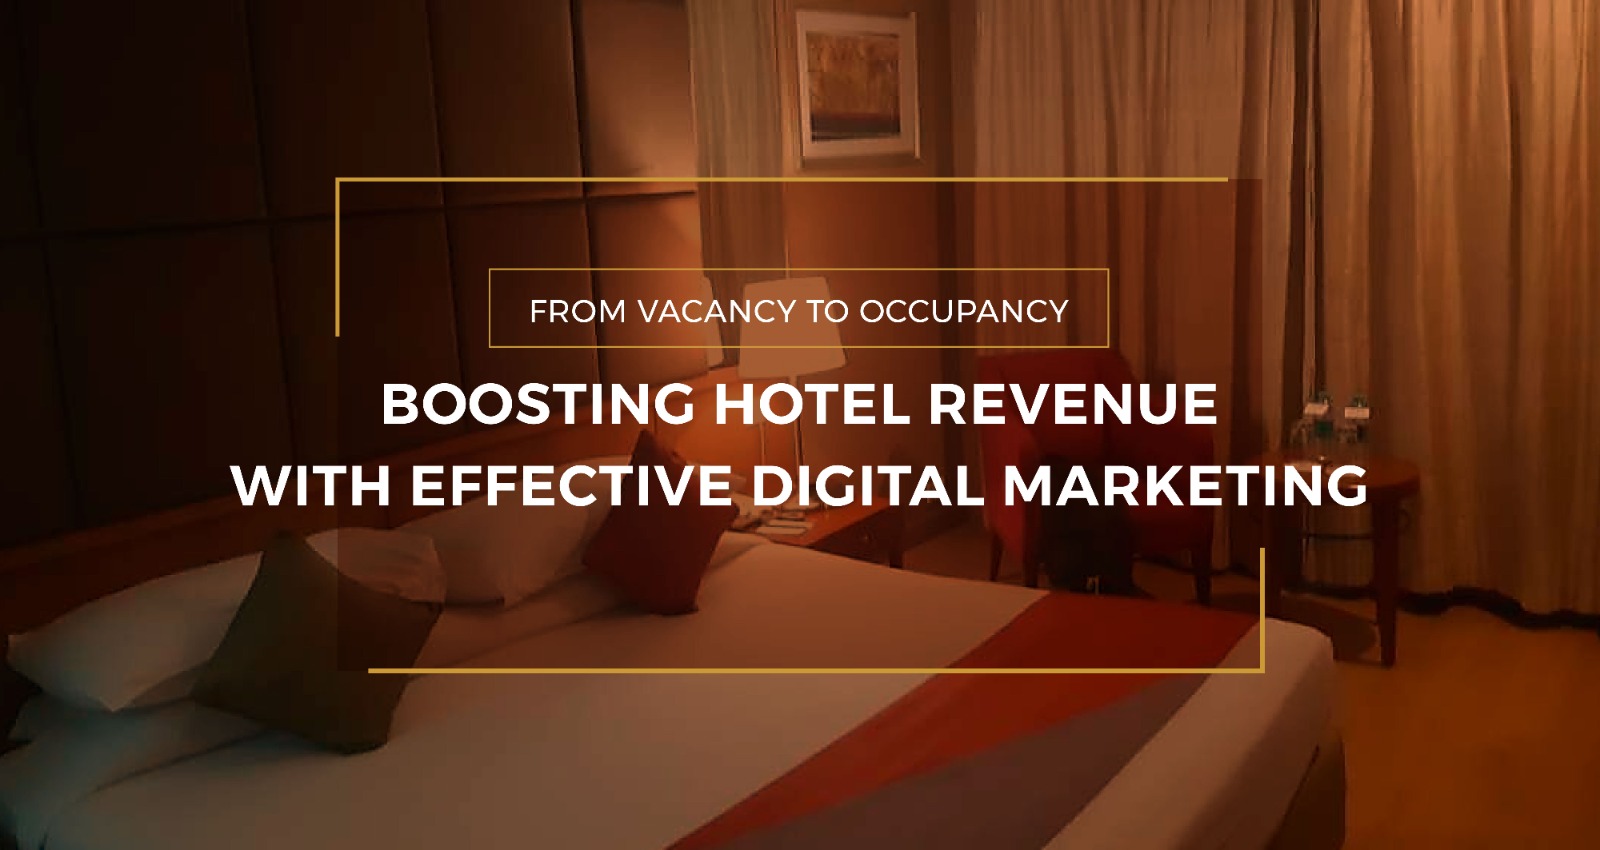 From Vacancy to Occupancy: Boosting Hotel Revenue with Effective Digital Marketing